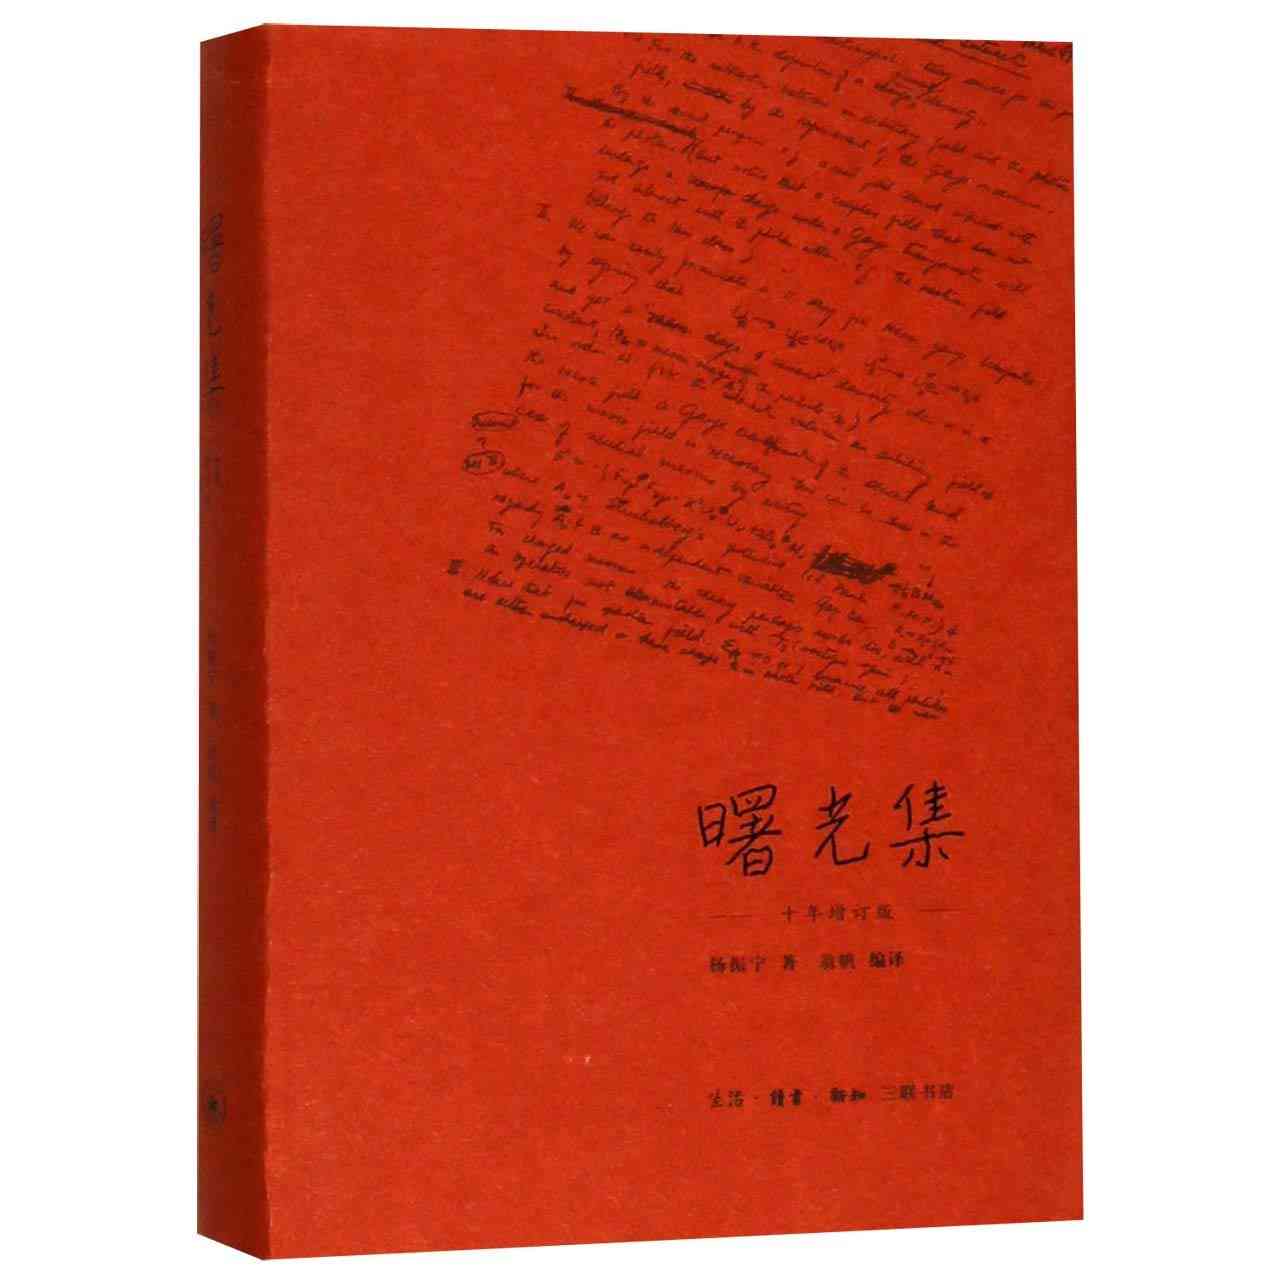 Essays Of Yang, Chen-ning Book